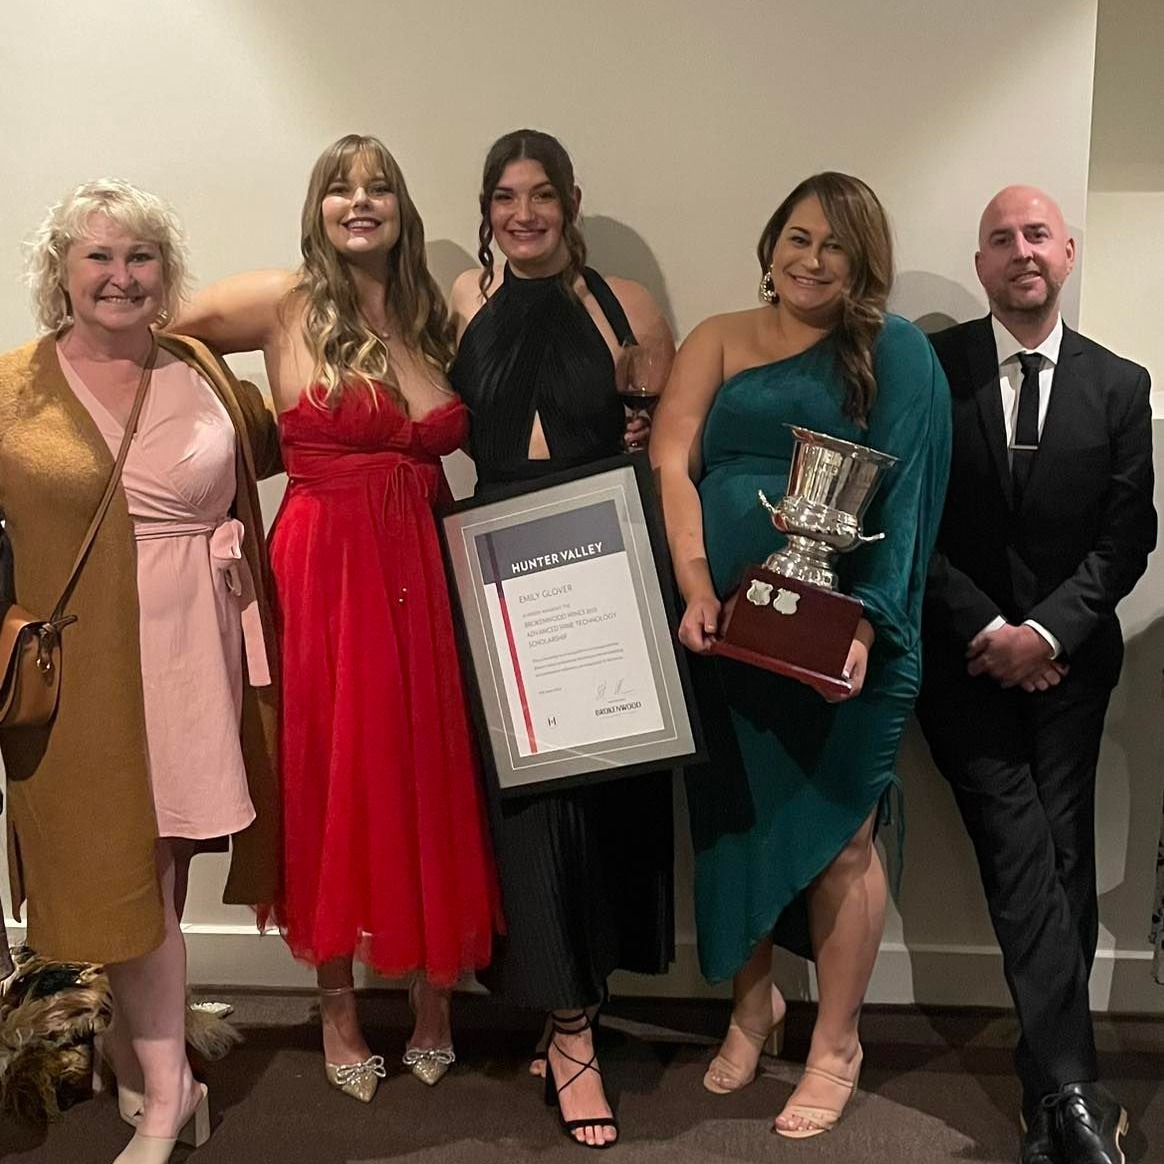 DRINKS TRADE: A bright future for women in wine at the Hunter Valley Legends Awards